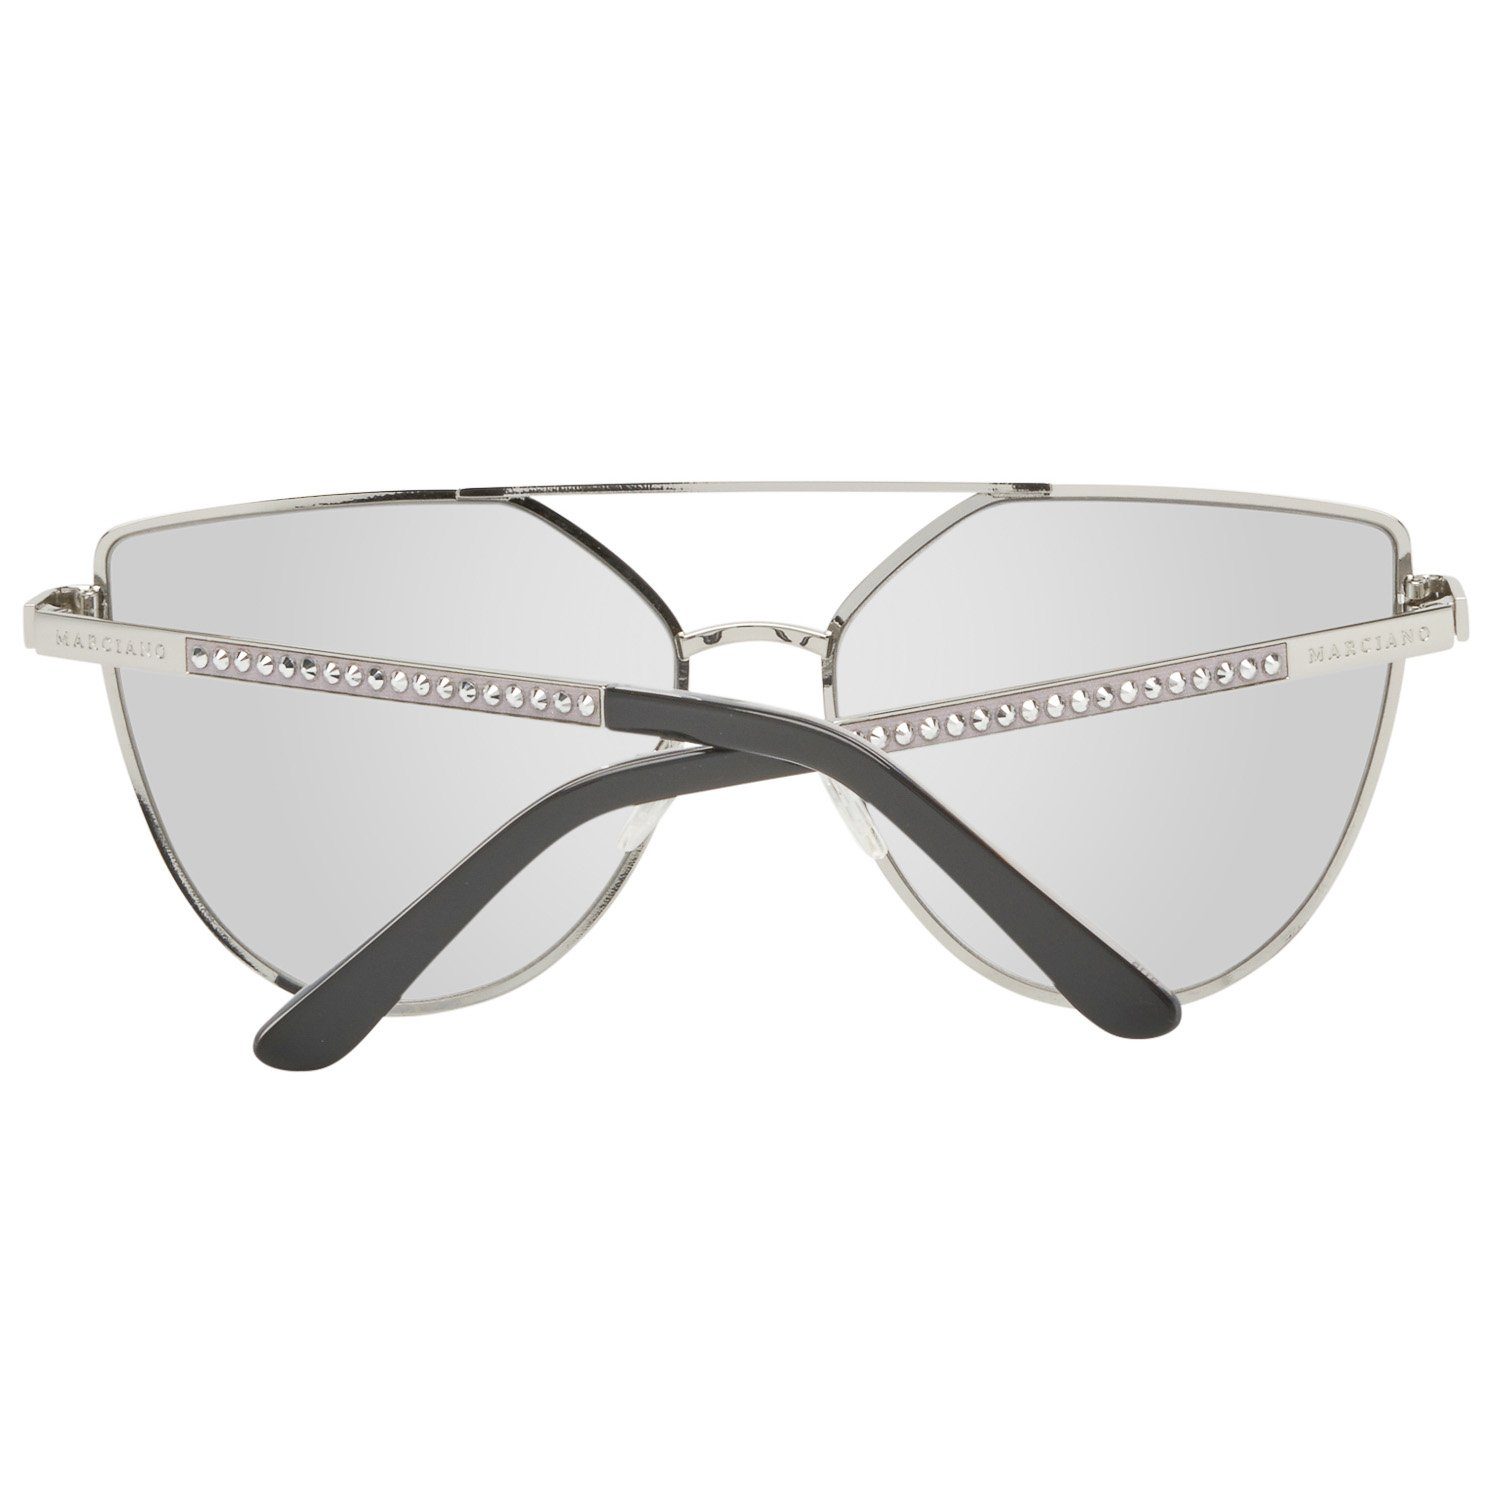 Guess by Sonnenbrille Marciano